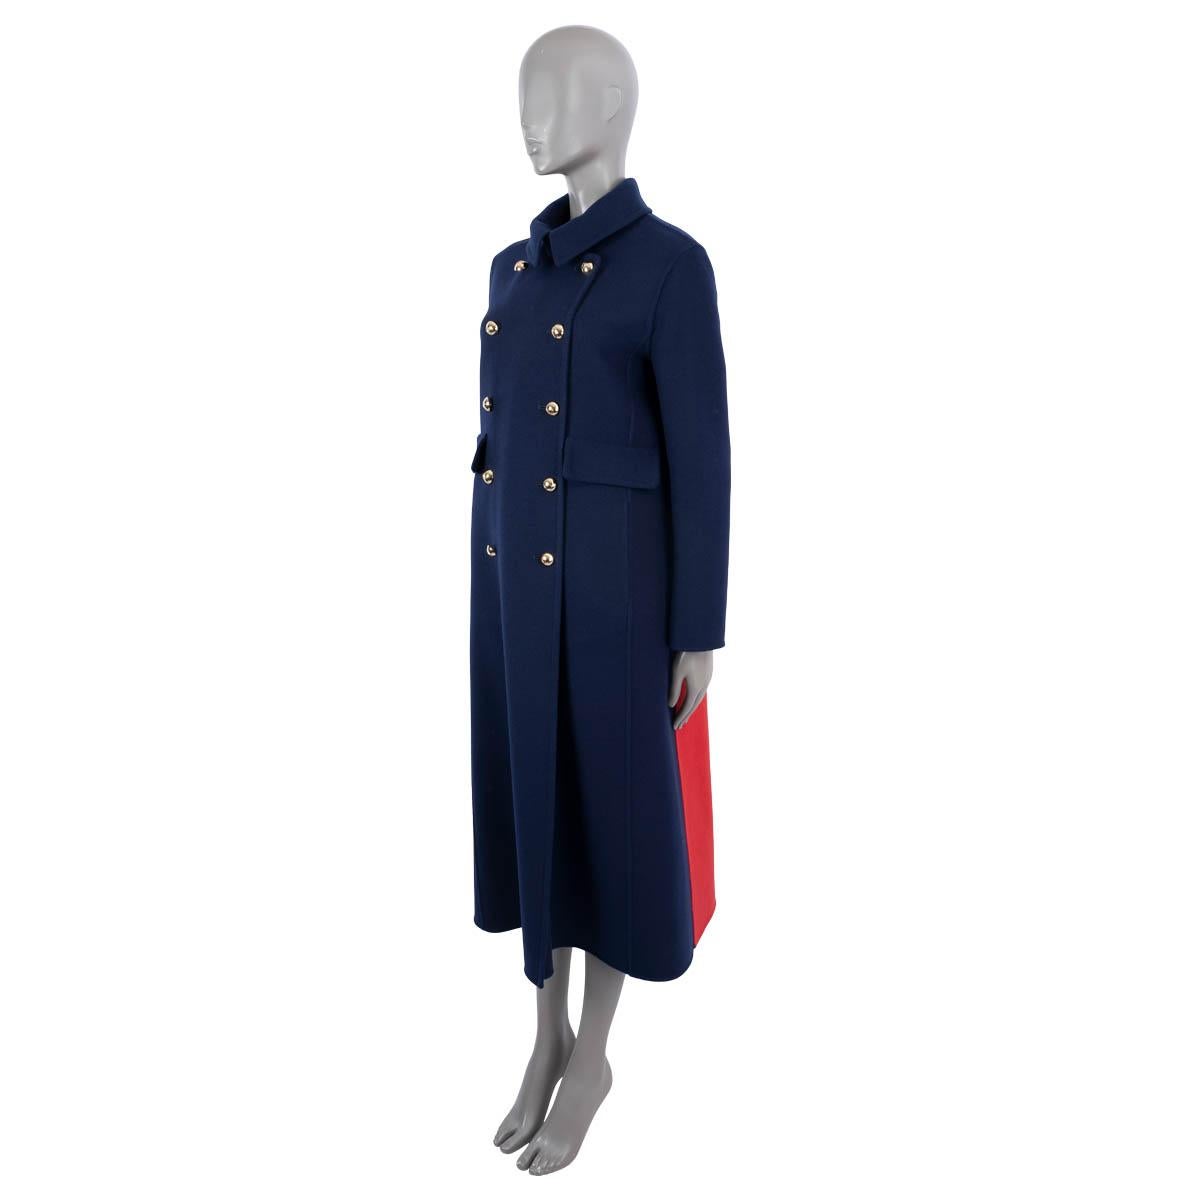 100% authentic Christian Dior double face long coat in navy blue, red and white cashmere (100%). The design features a double breasted front with light gold-tone CD embellished metal buttons, two front flap pockets and a box pleat on the back. Brand